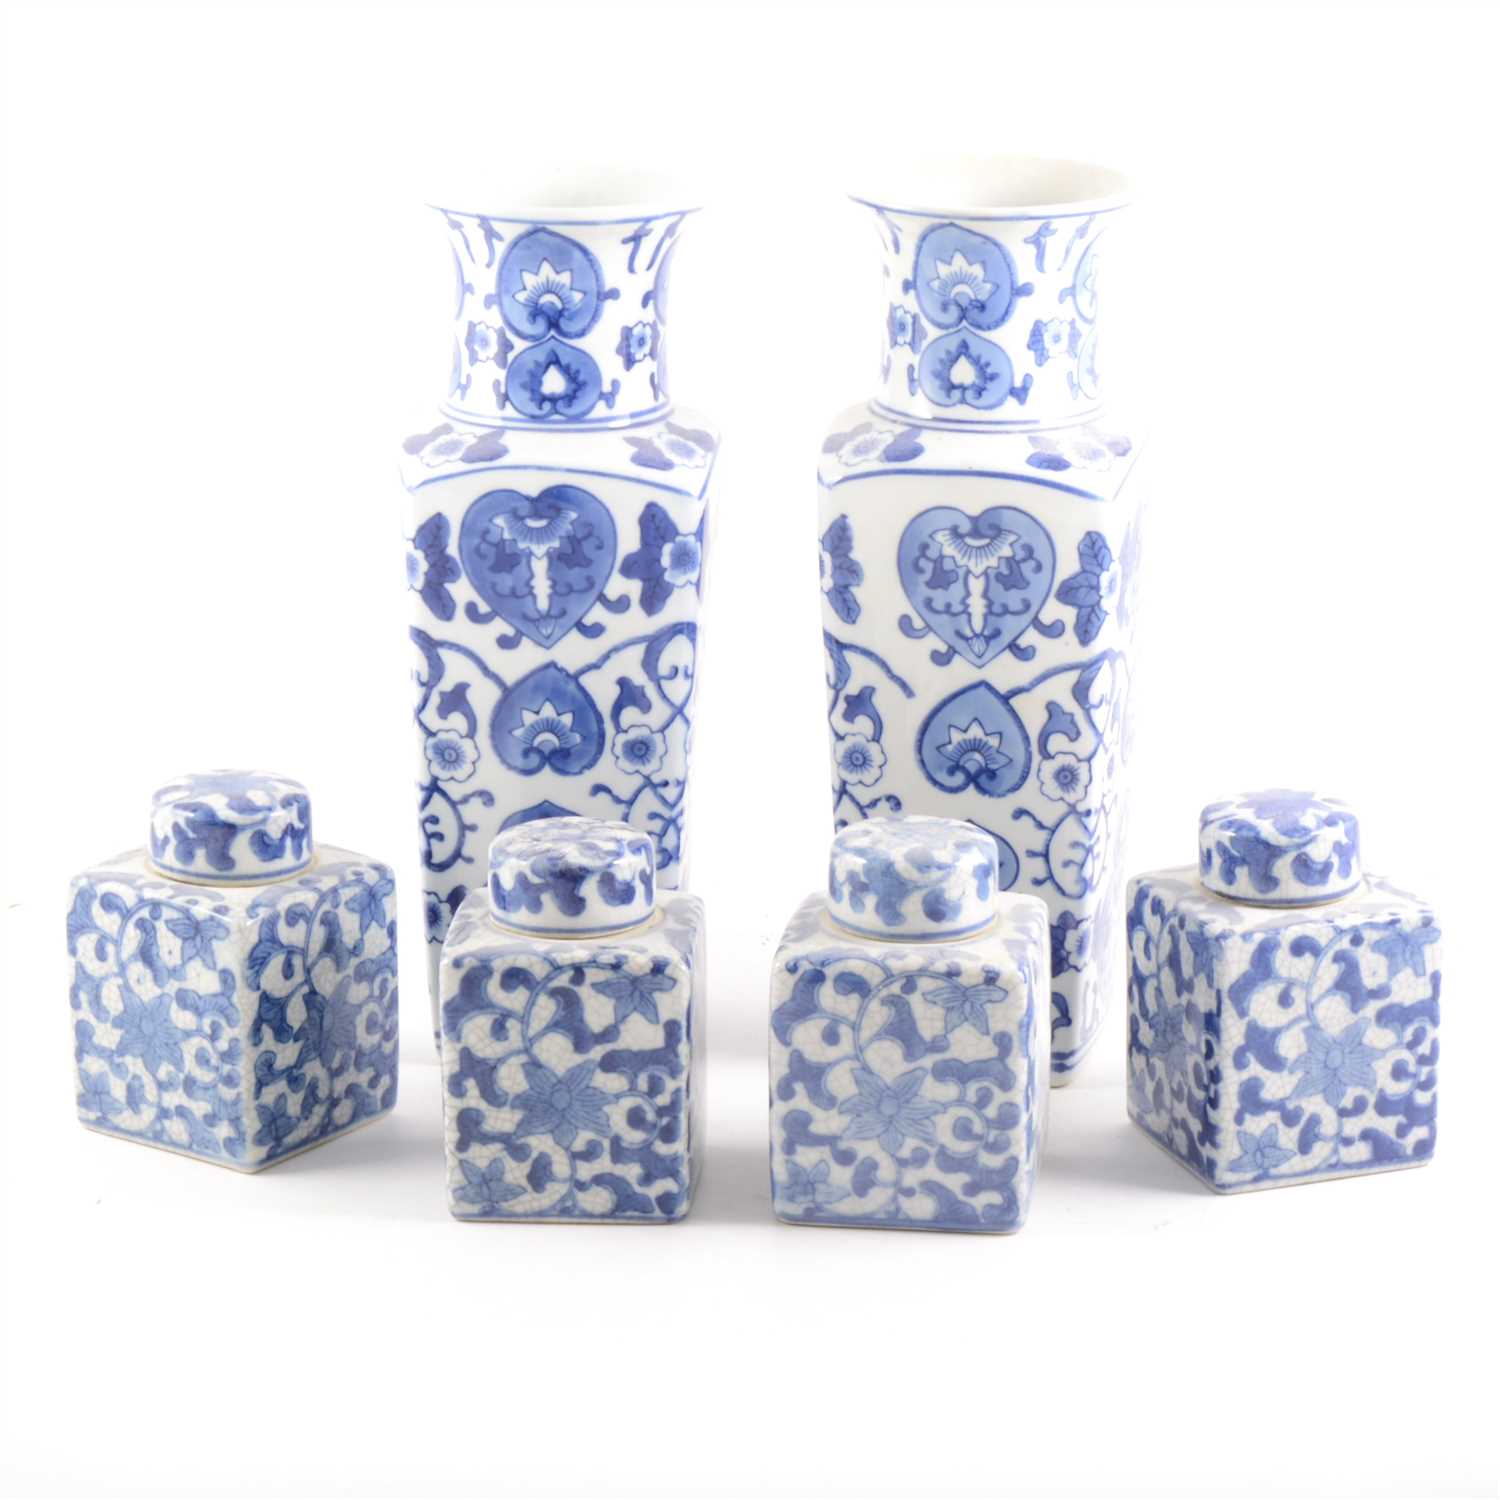 Lot 36 - A pair of modern Chinese blue and white vases, and twenty covered jars